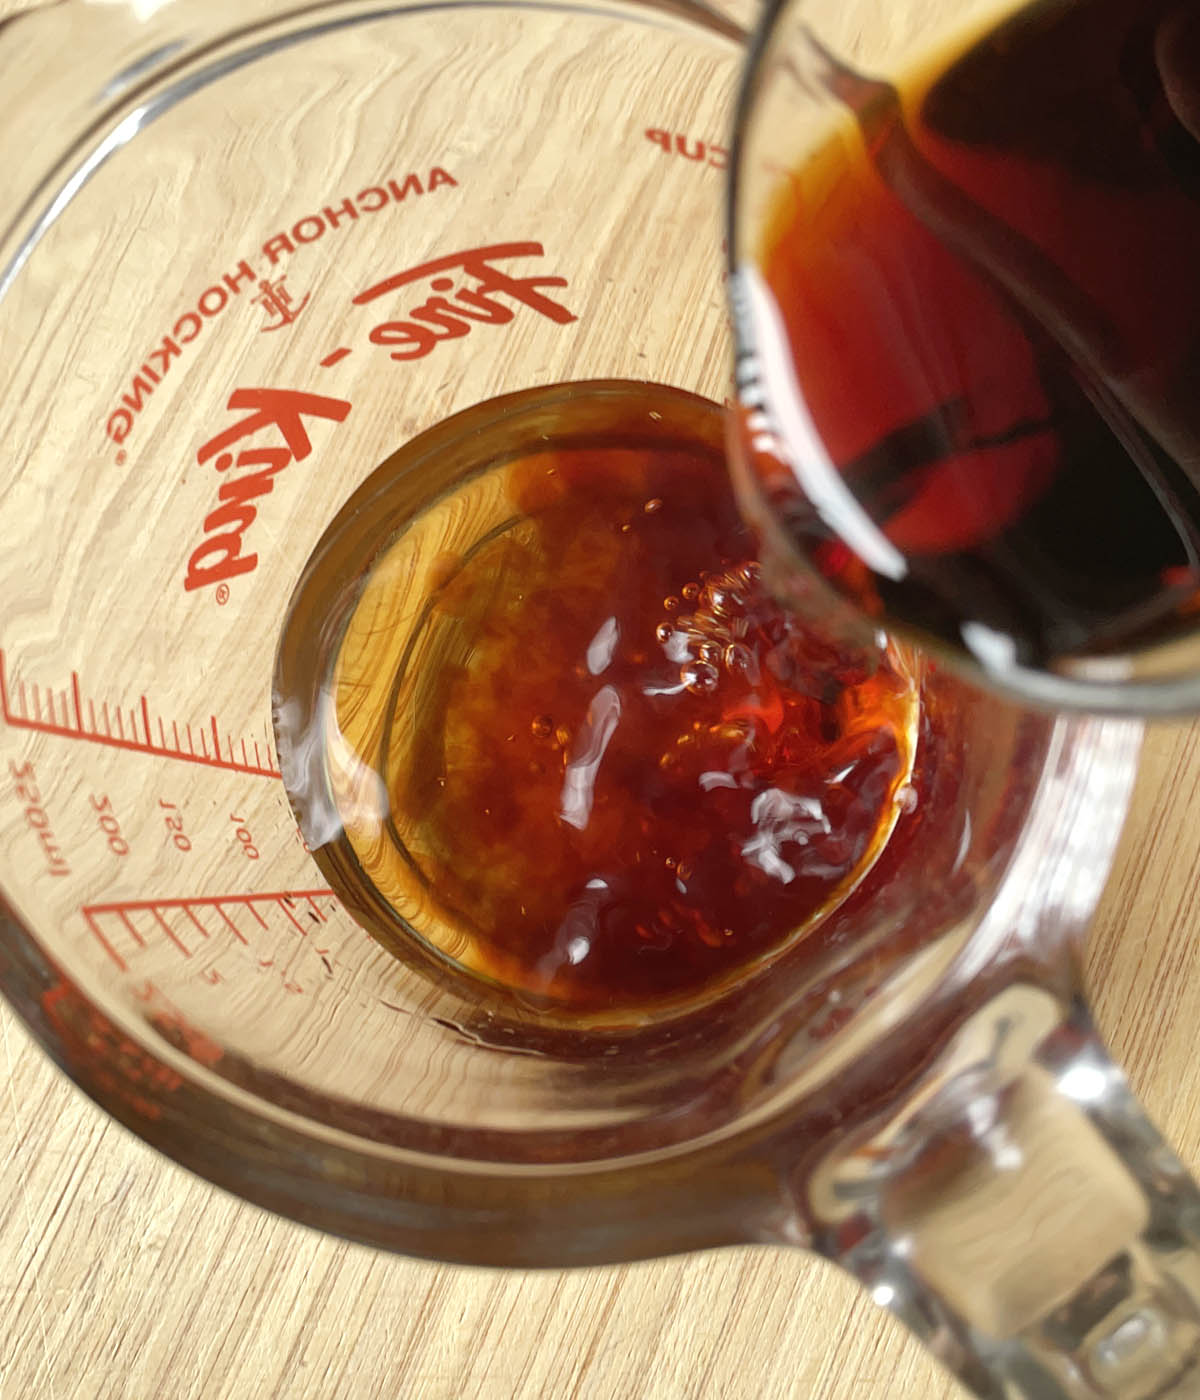 Brown soy sauce being poured into a glass measuring cup.